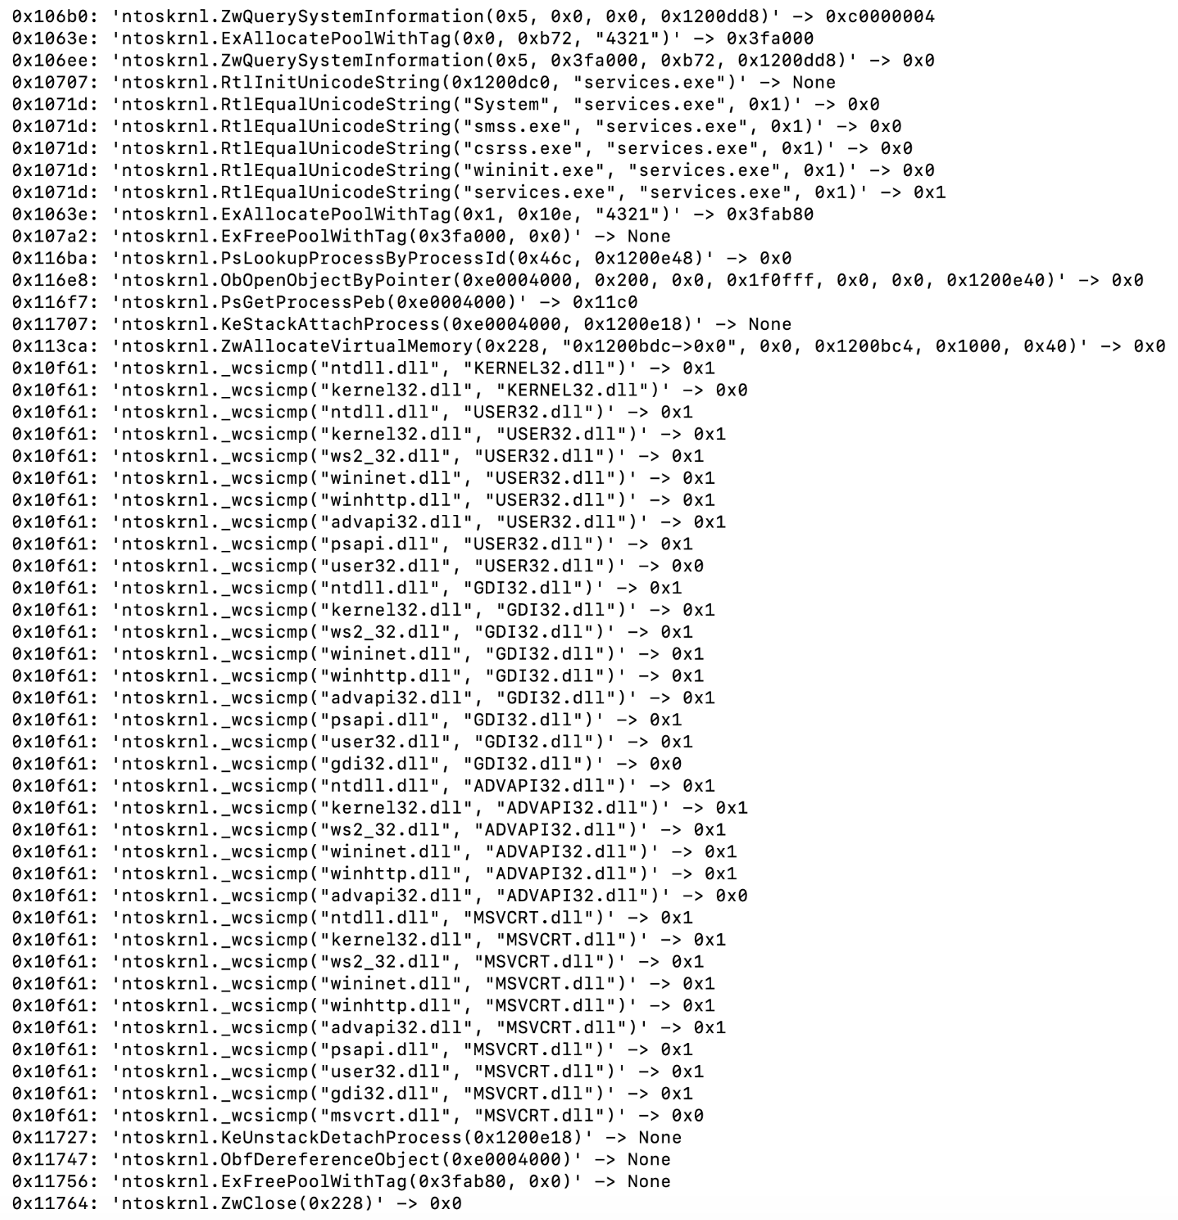 Logged APIs used by tcprelay.sys rootkit to resolve exports for its user mode implant